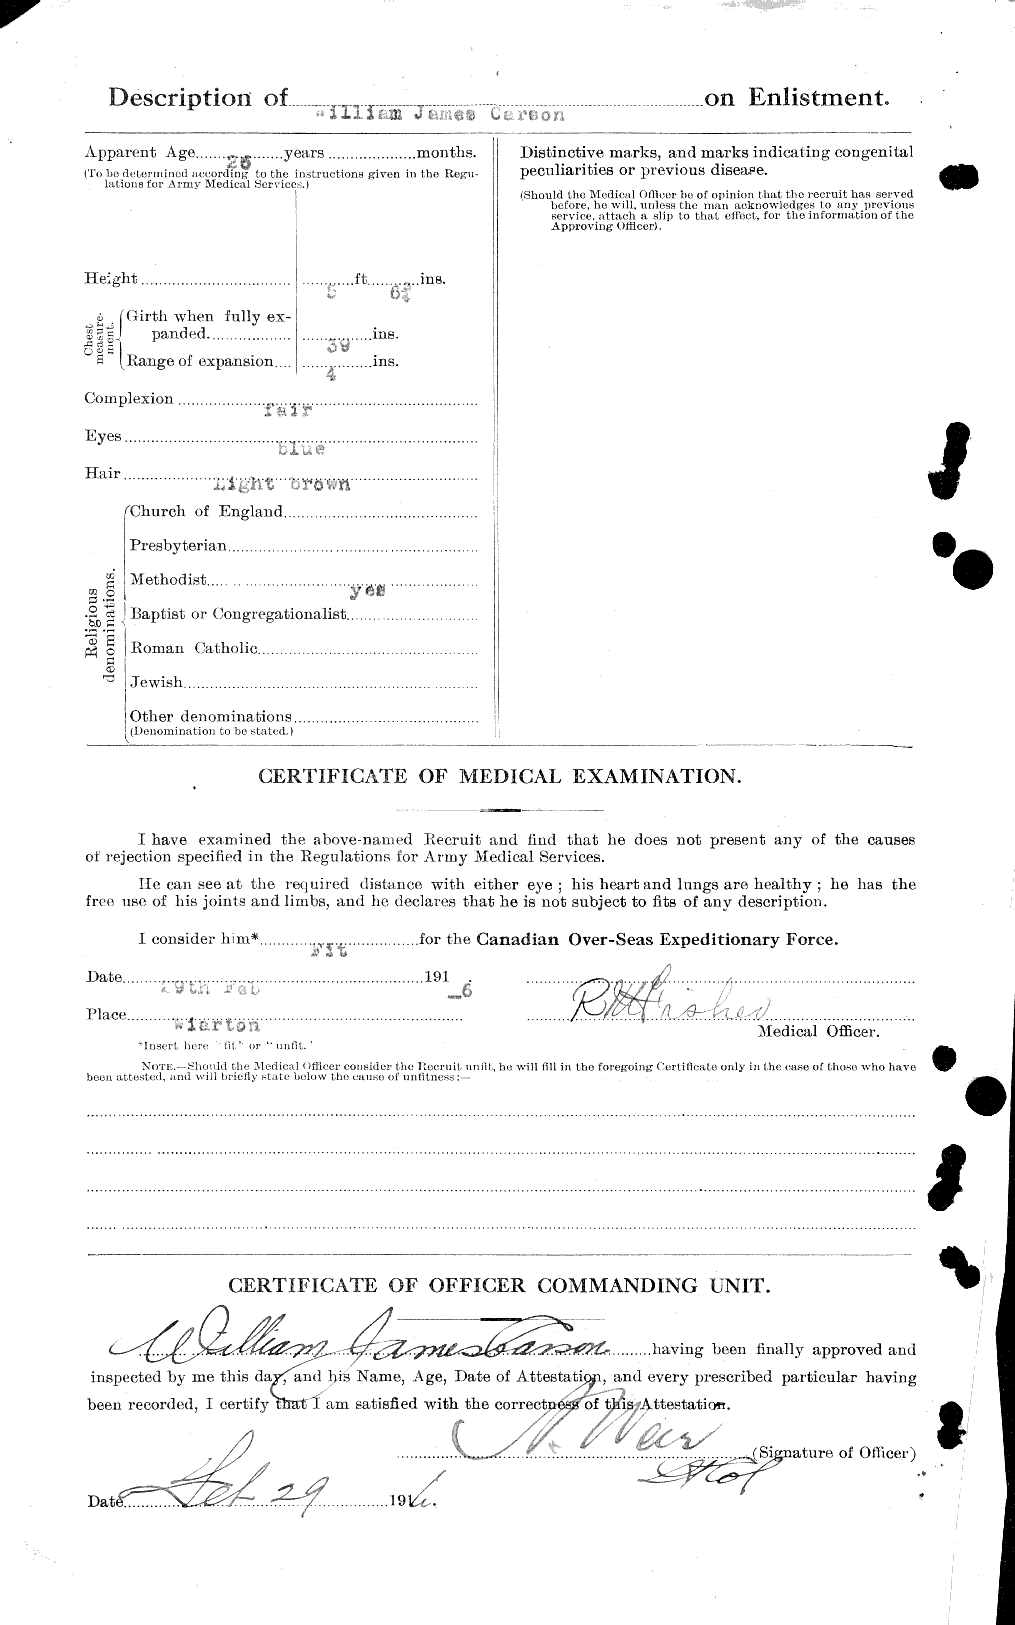 Personnel Records of the First World War - CEF 010873b